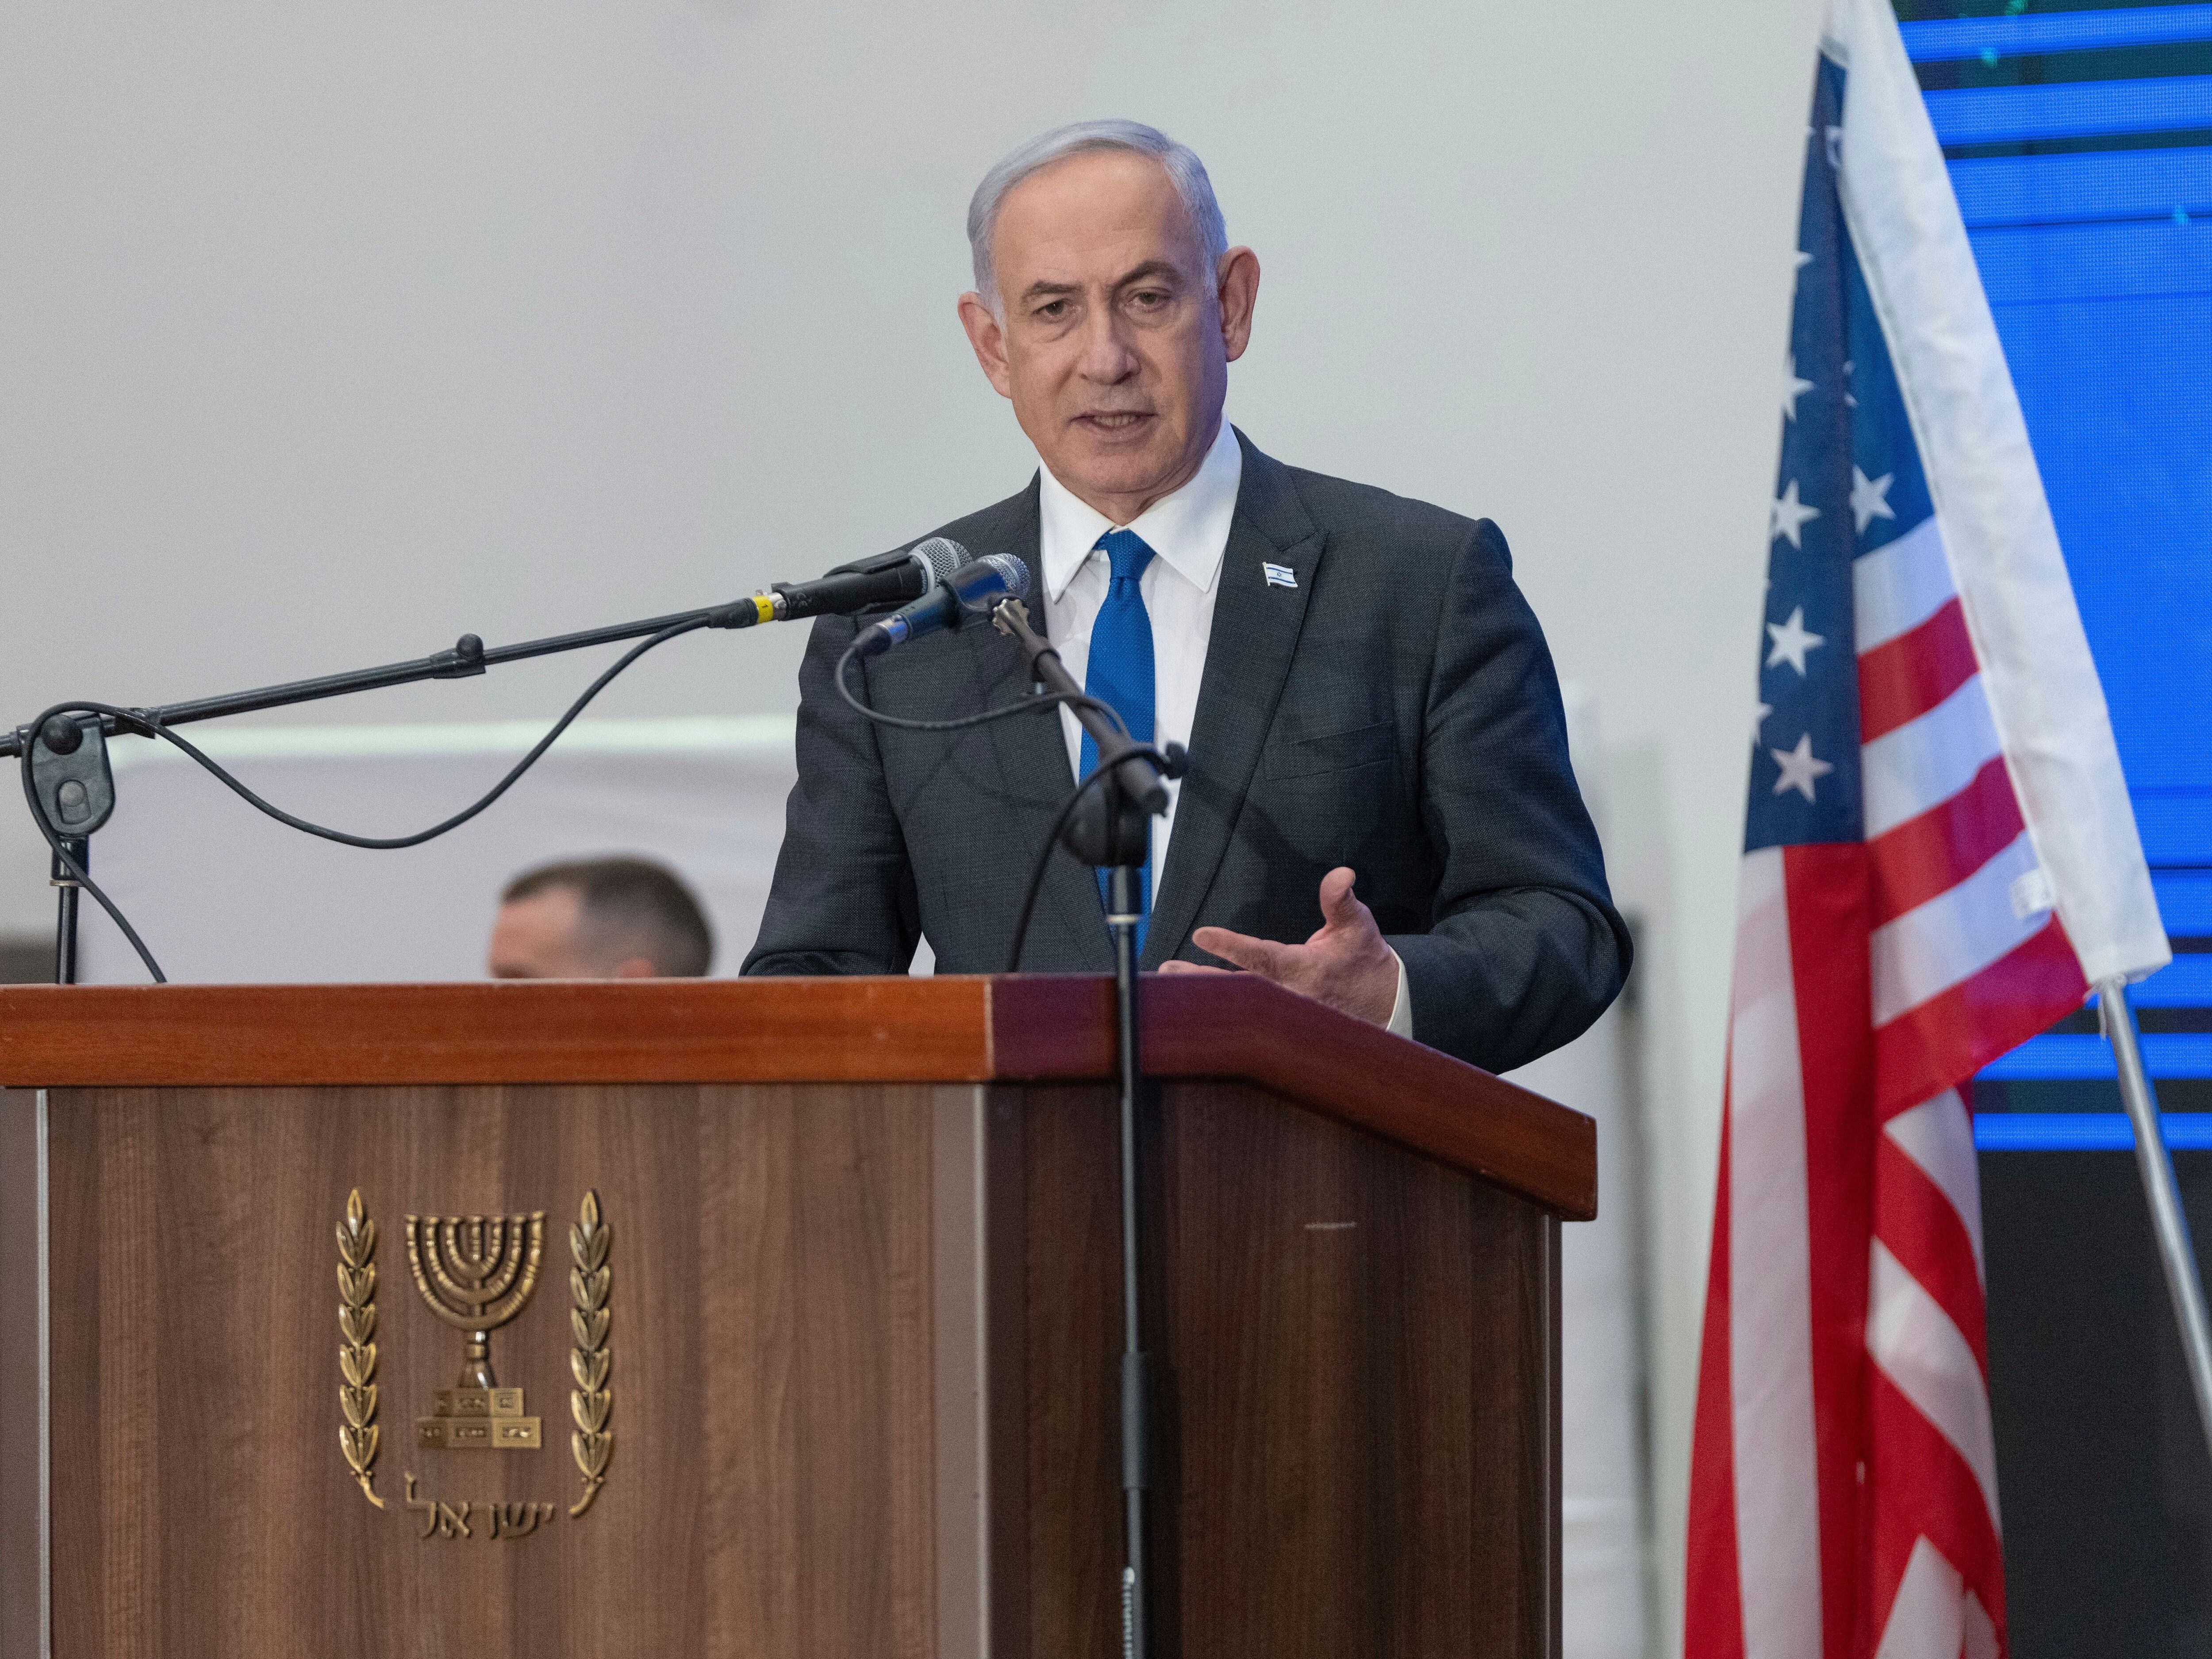 Cracks widen in Netanyahu’s government as top political rival heads to US talks